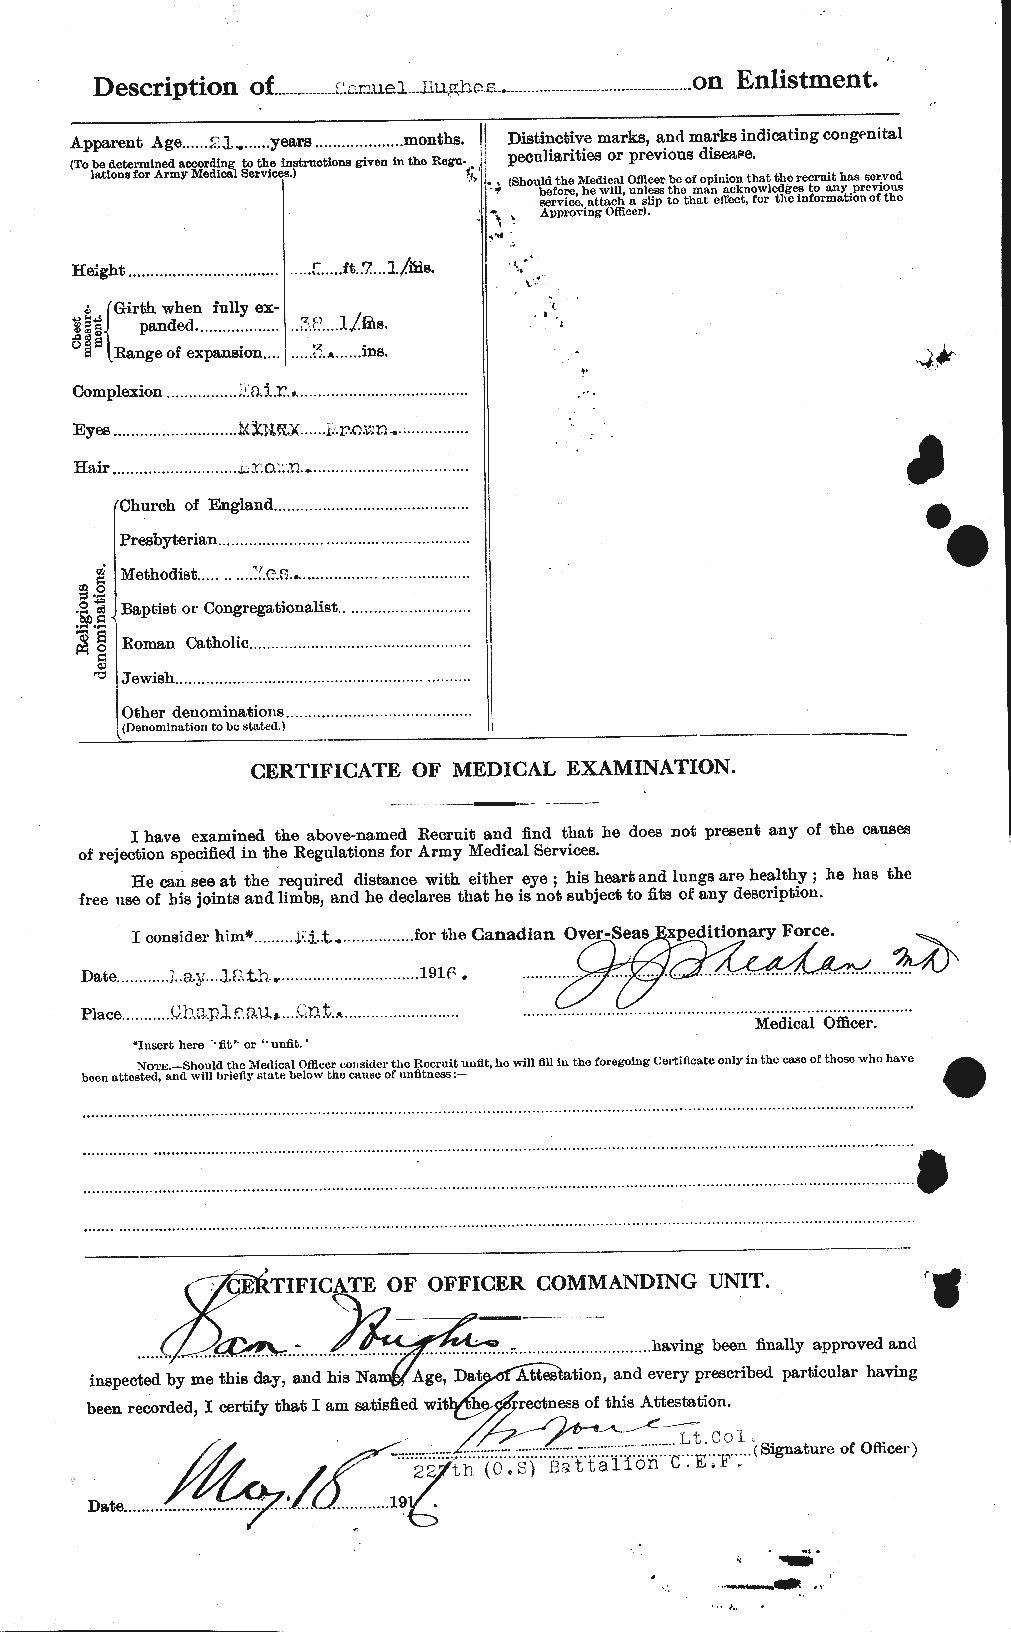 Personnel Records of the First World War - CEF 406637b